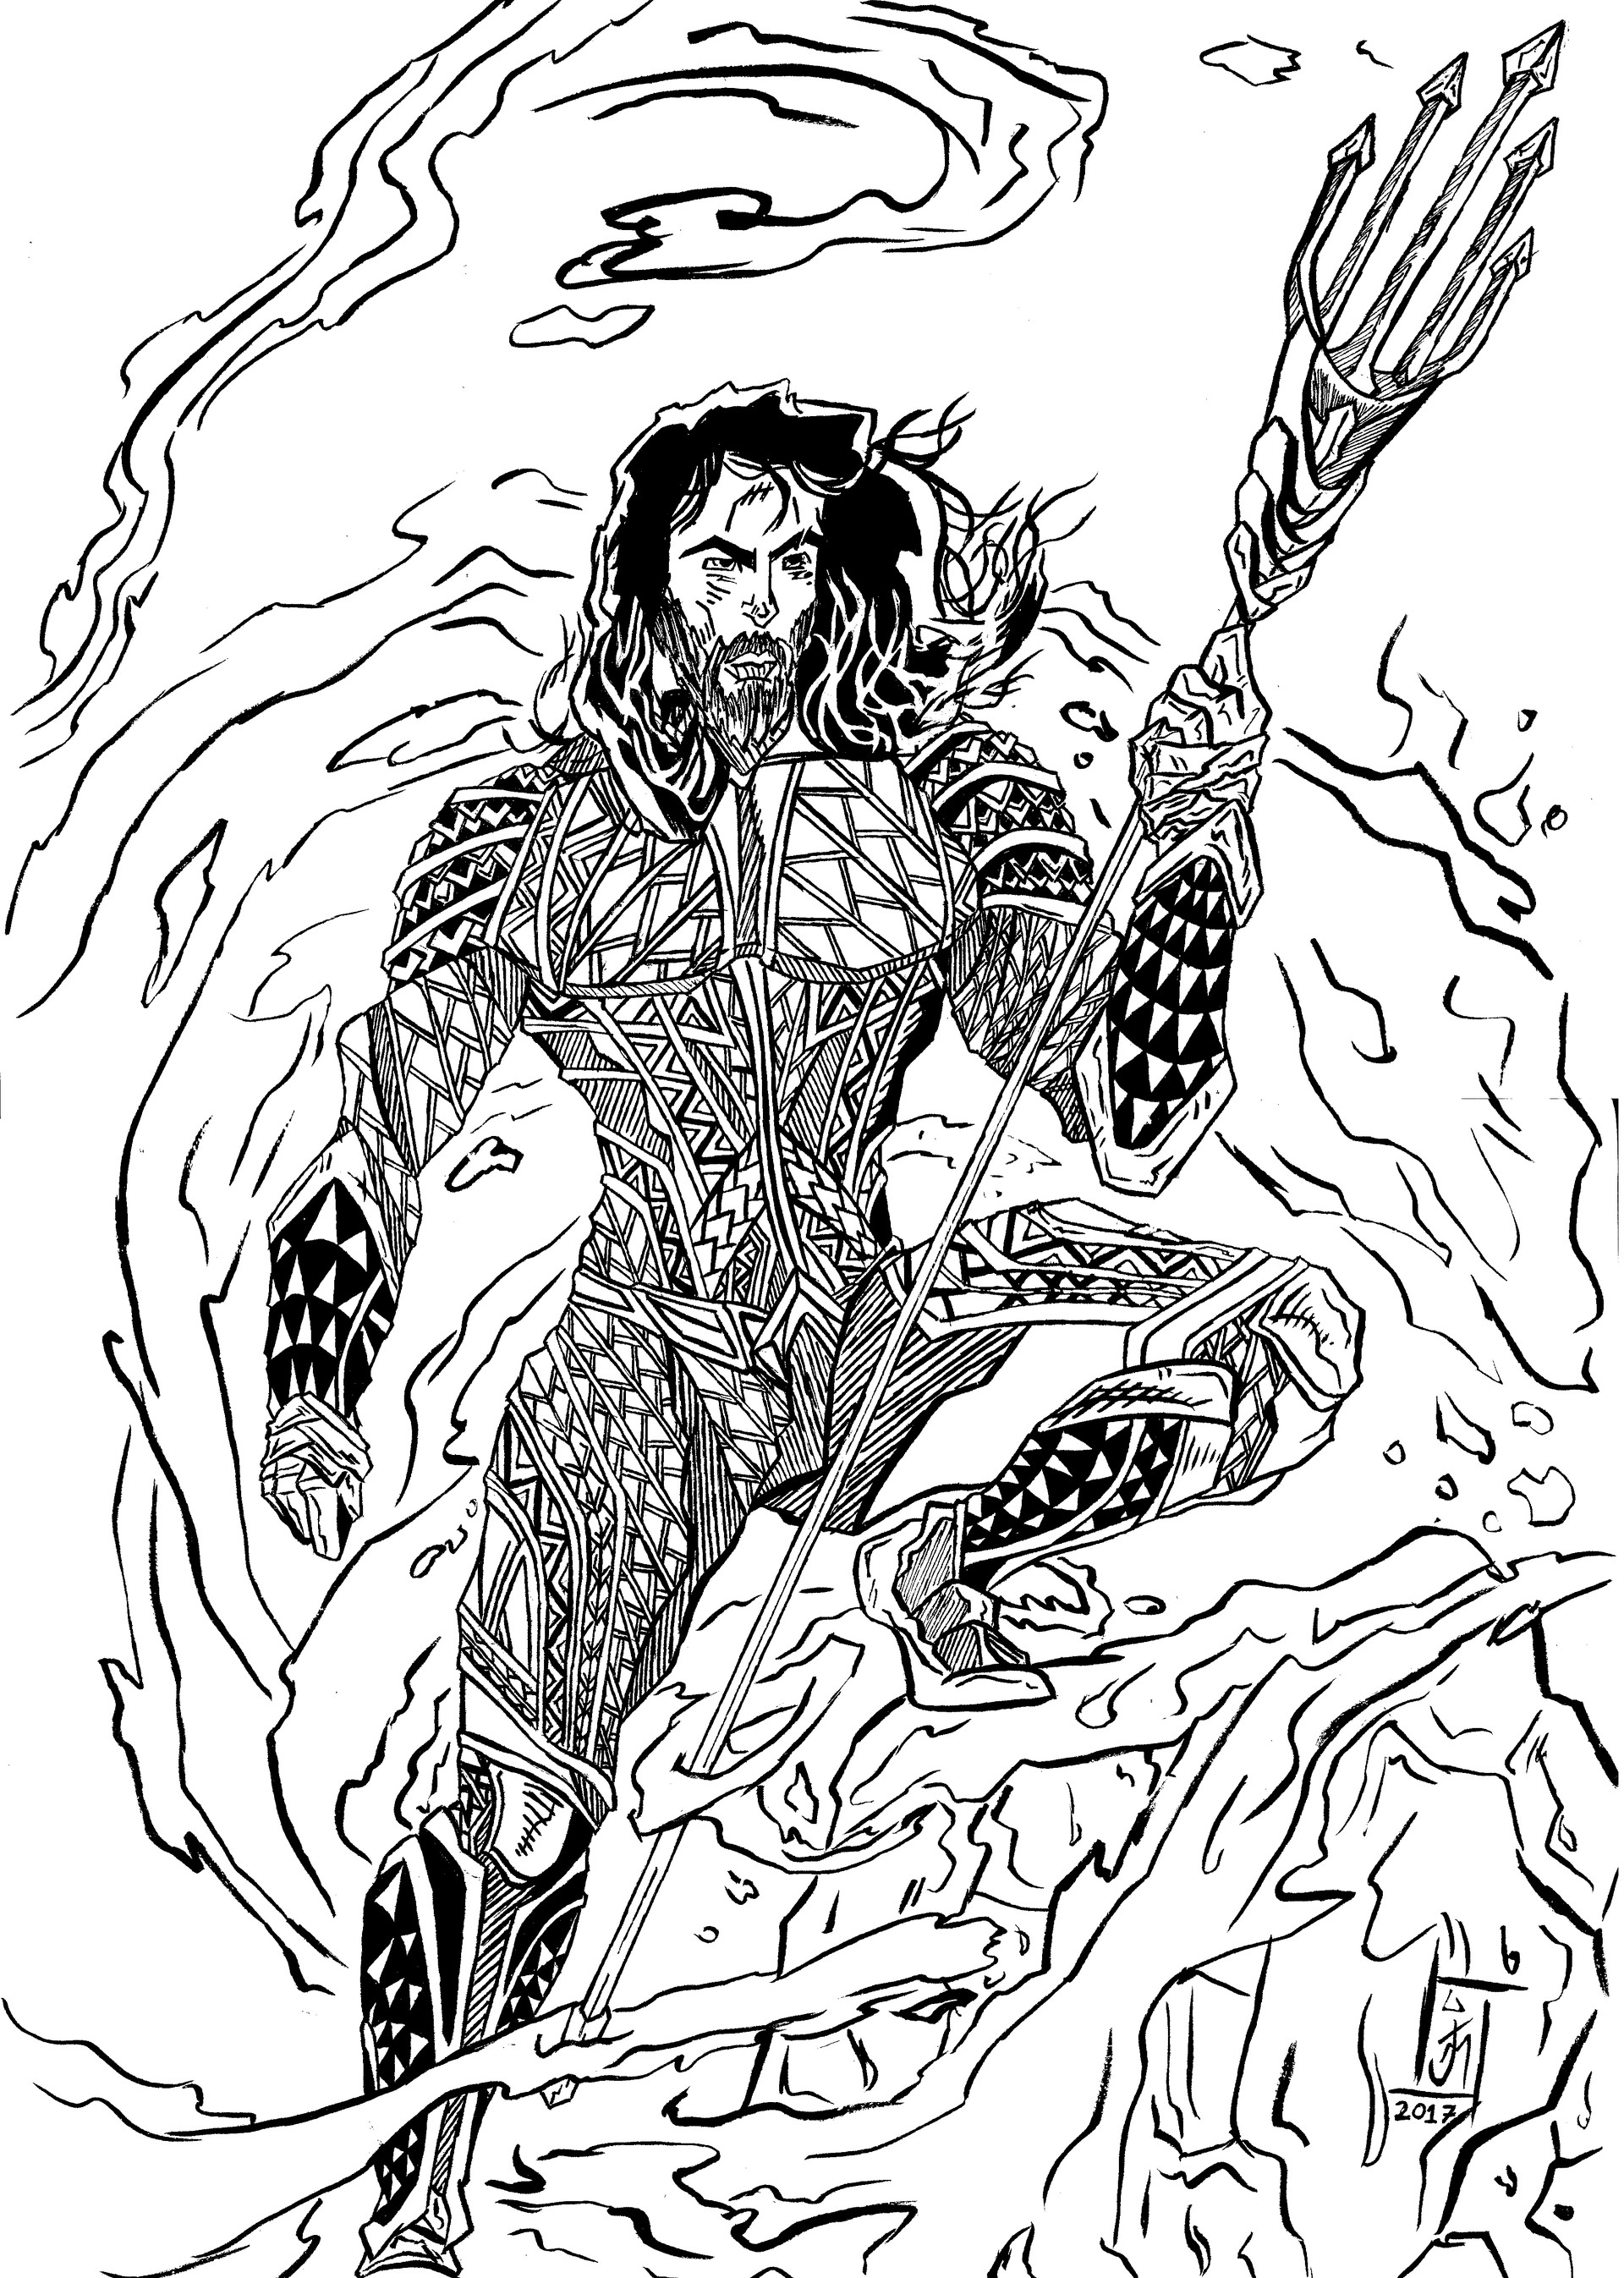 Aquaman Coloring Pages - Learny Kids